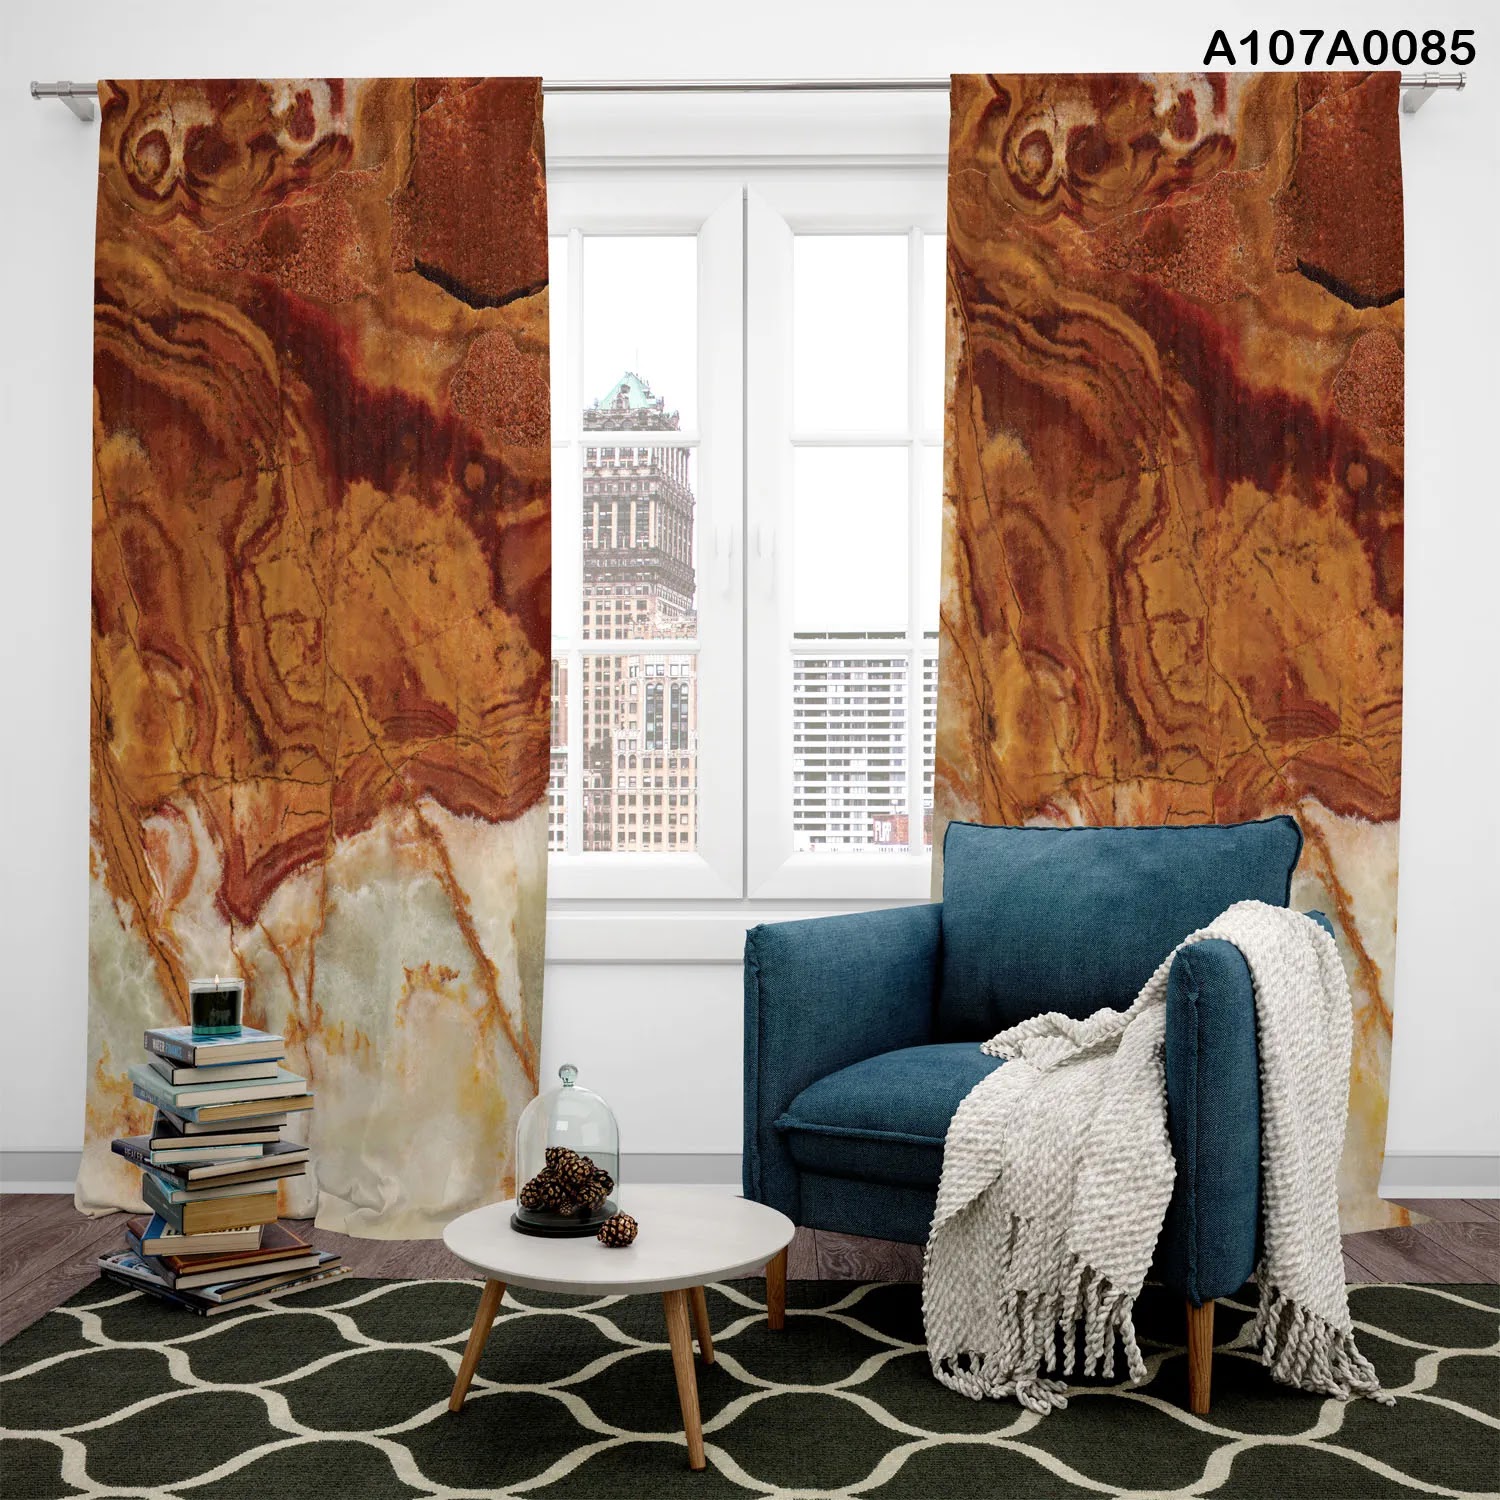 Curtains with color combination of brown and beige for wooden furniture